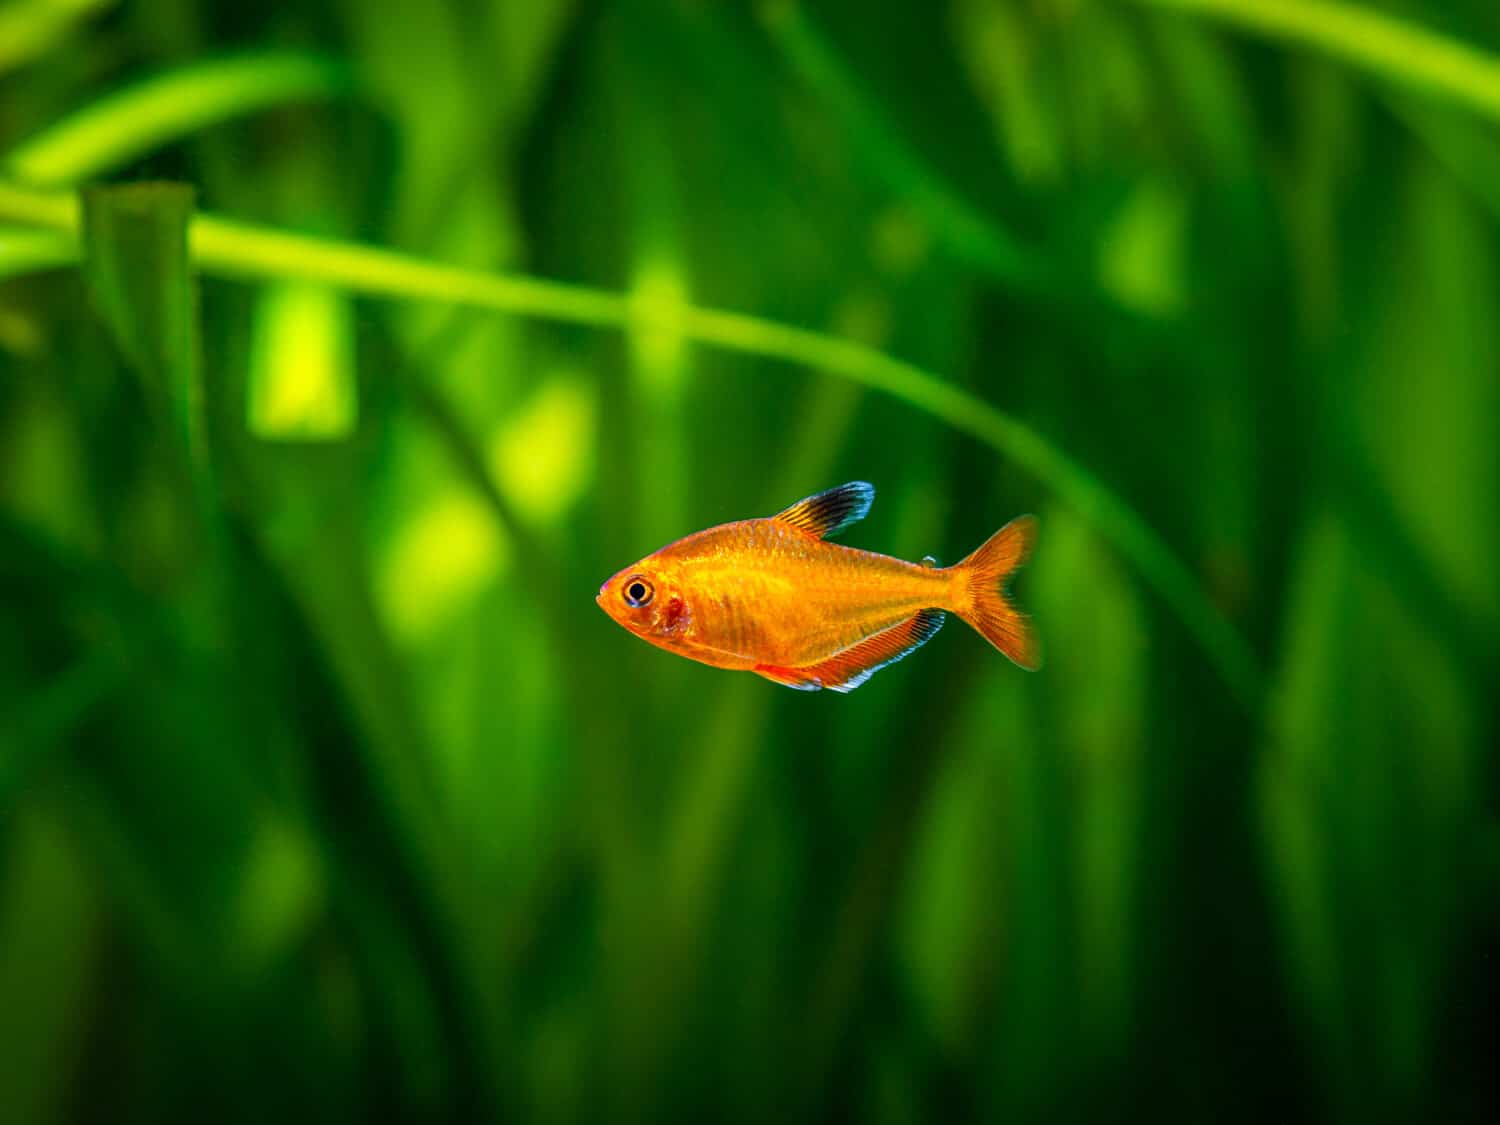 tetra serpae (Hyphessobrycon eques) in a fish tank with blurred background